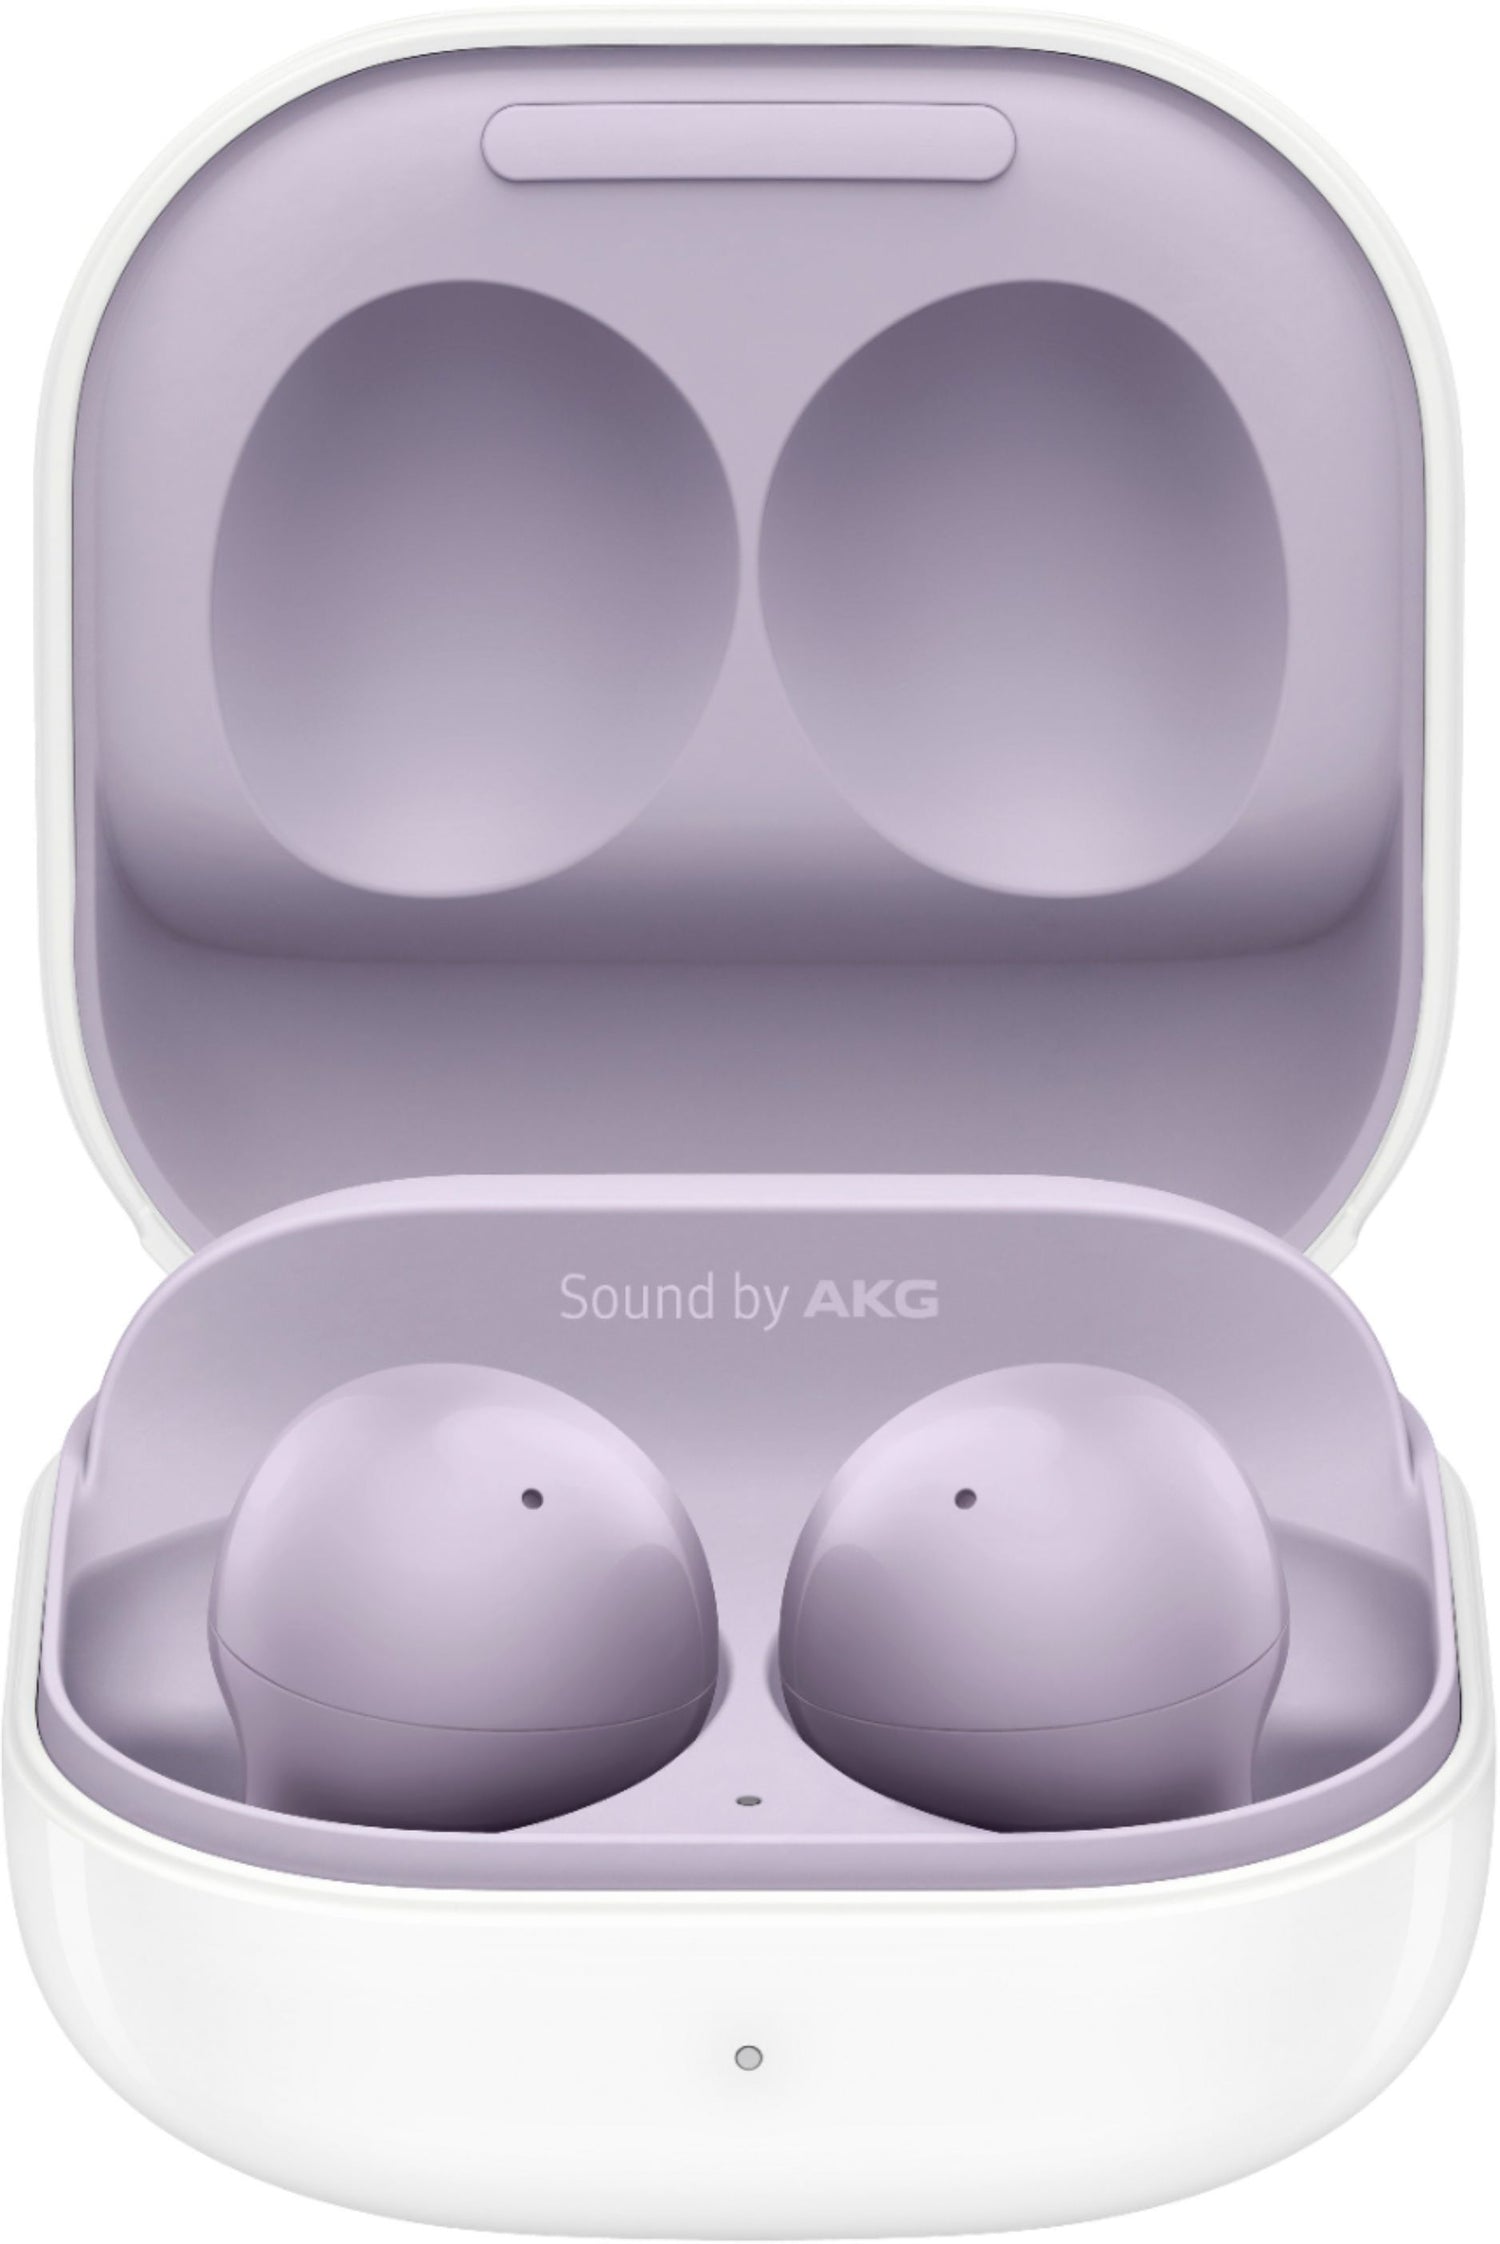 Samsung Galaxy Buds2 True Wireless Noise Cancelling Bluetooth Earbuds - Lavender (Certified Refurbished)